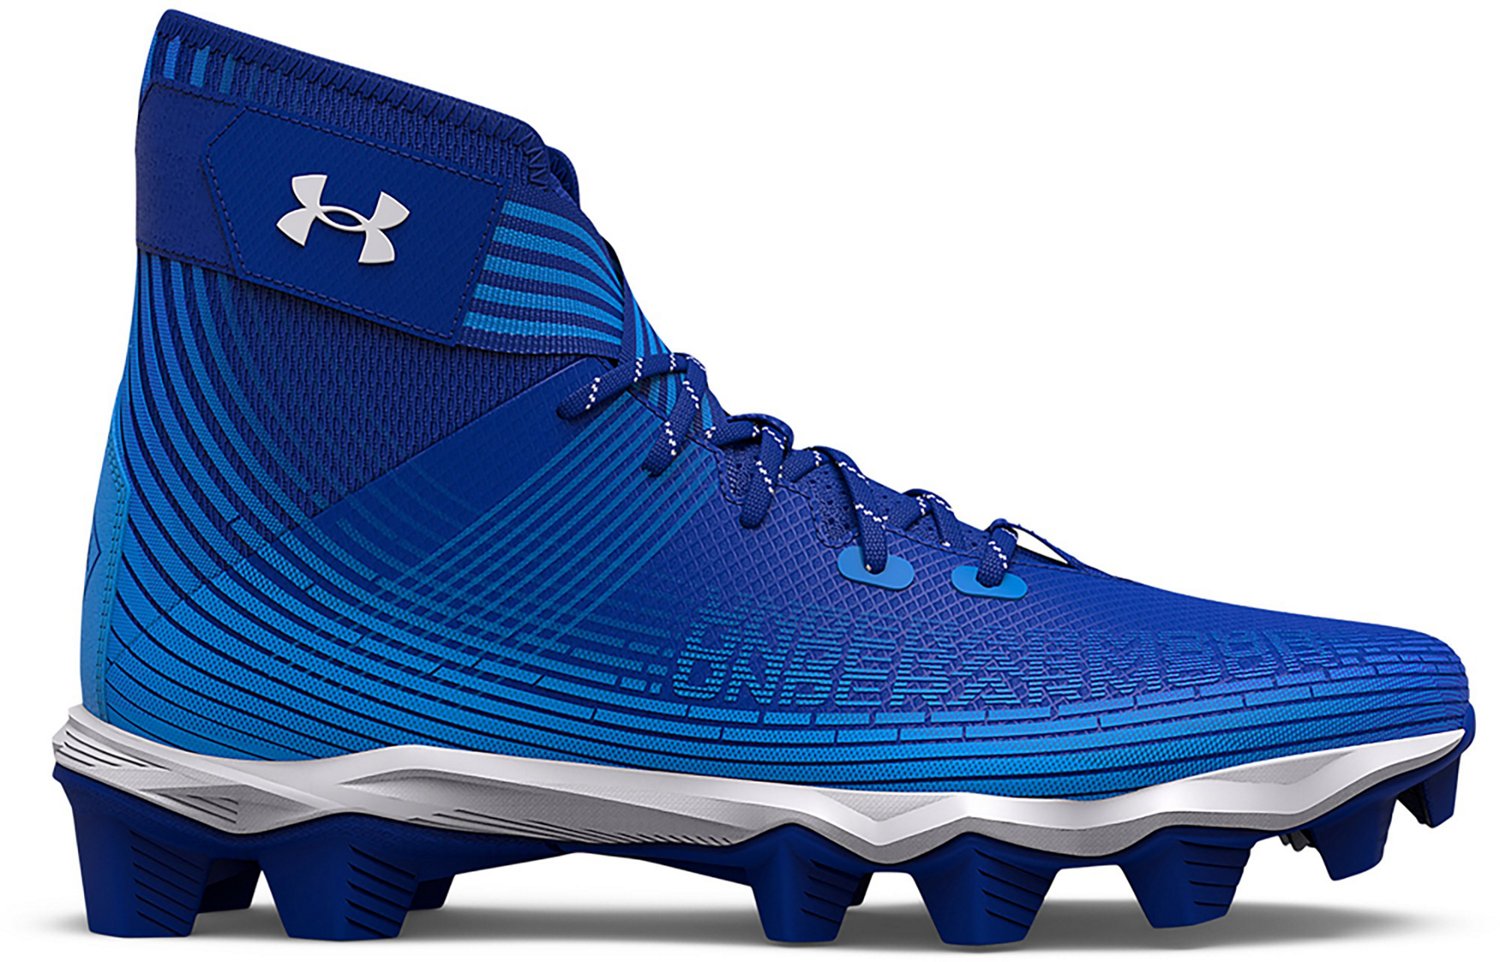 Under Armour Mens Highlight Franchise Football Cleats